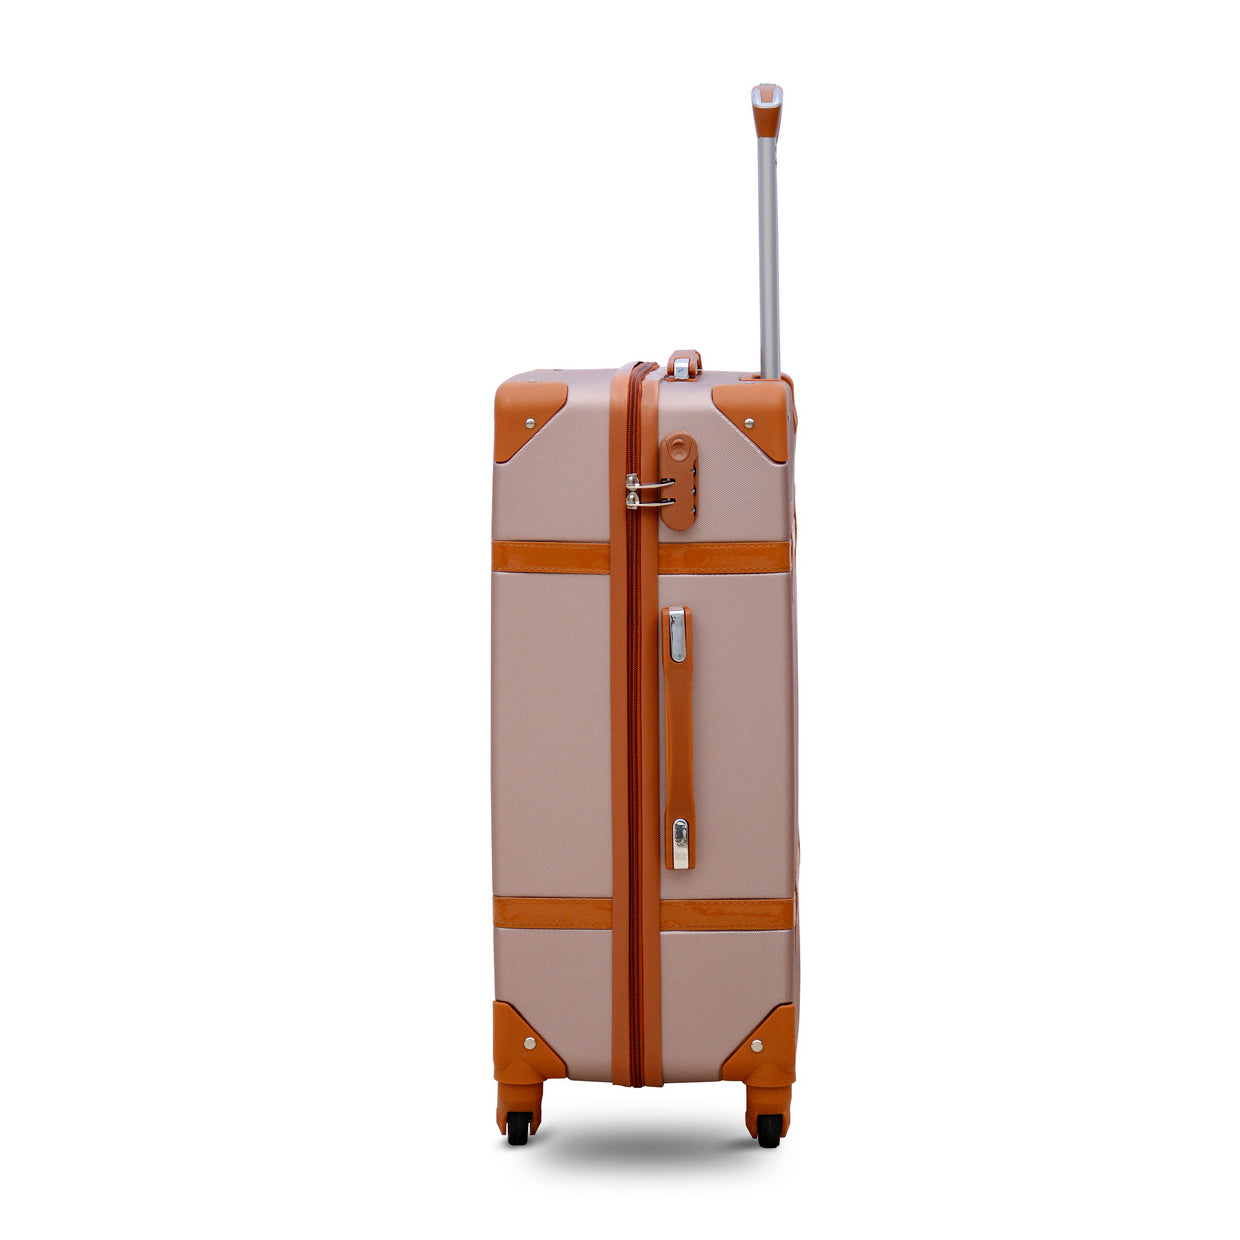 24" Corner Guard Lightweight ABS Luggage | Rose Gold Colour Hard Case Trolley Bag